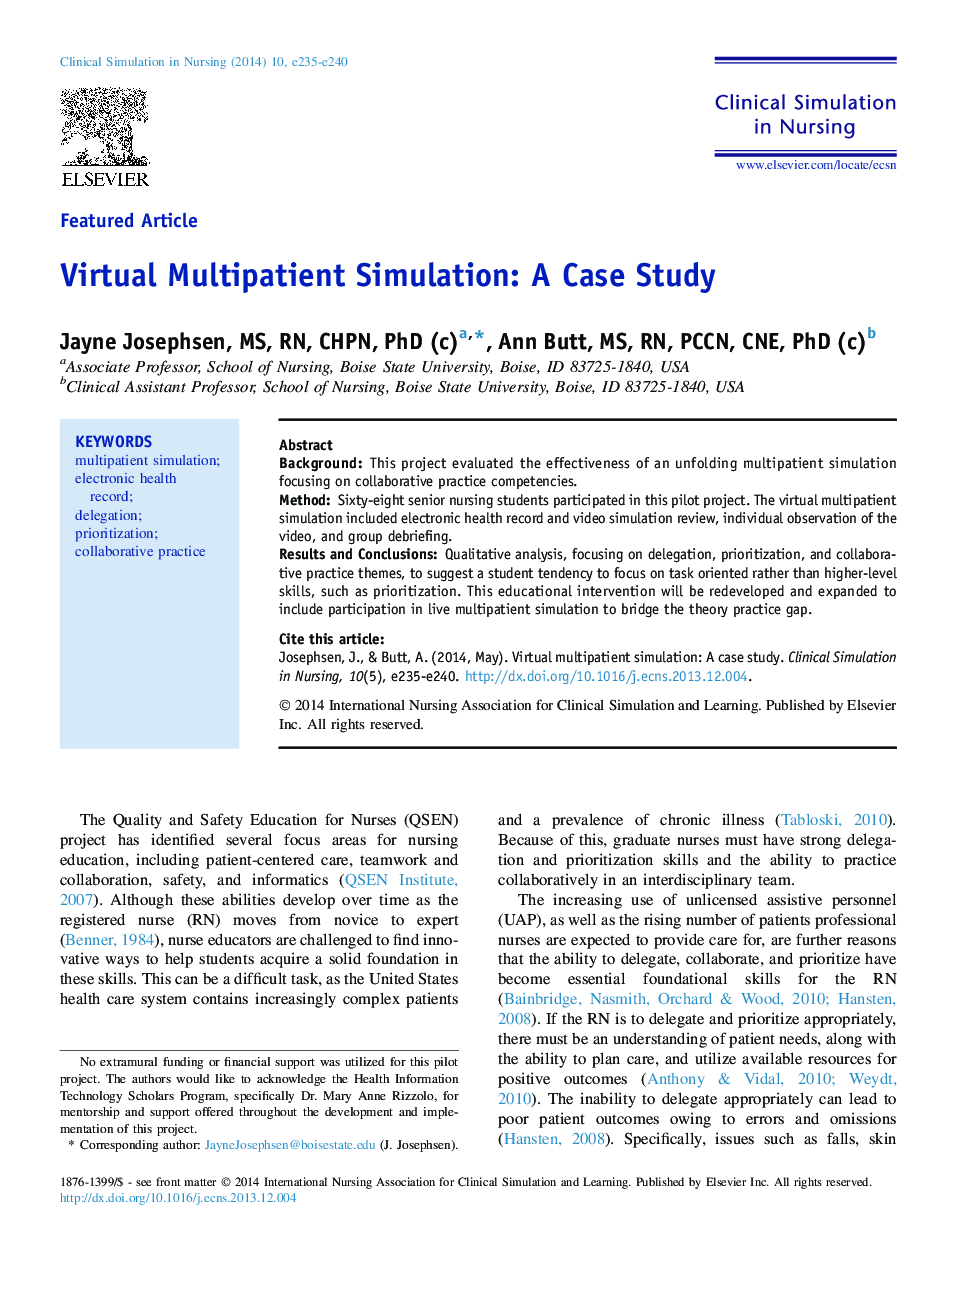 Featured ArticleVirtual Multipatient Simulation: A Case Study